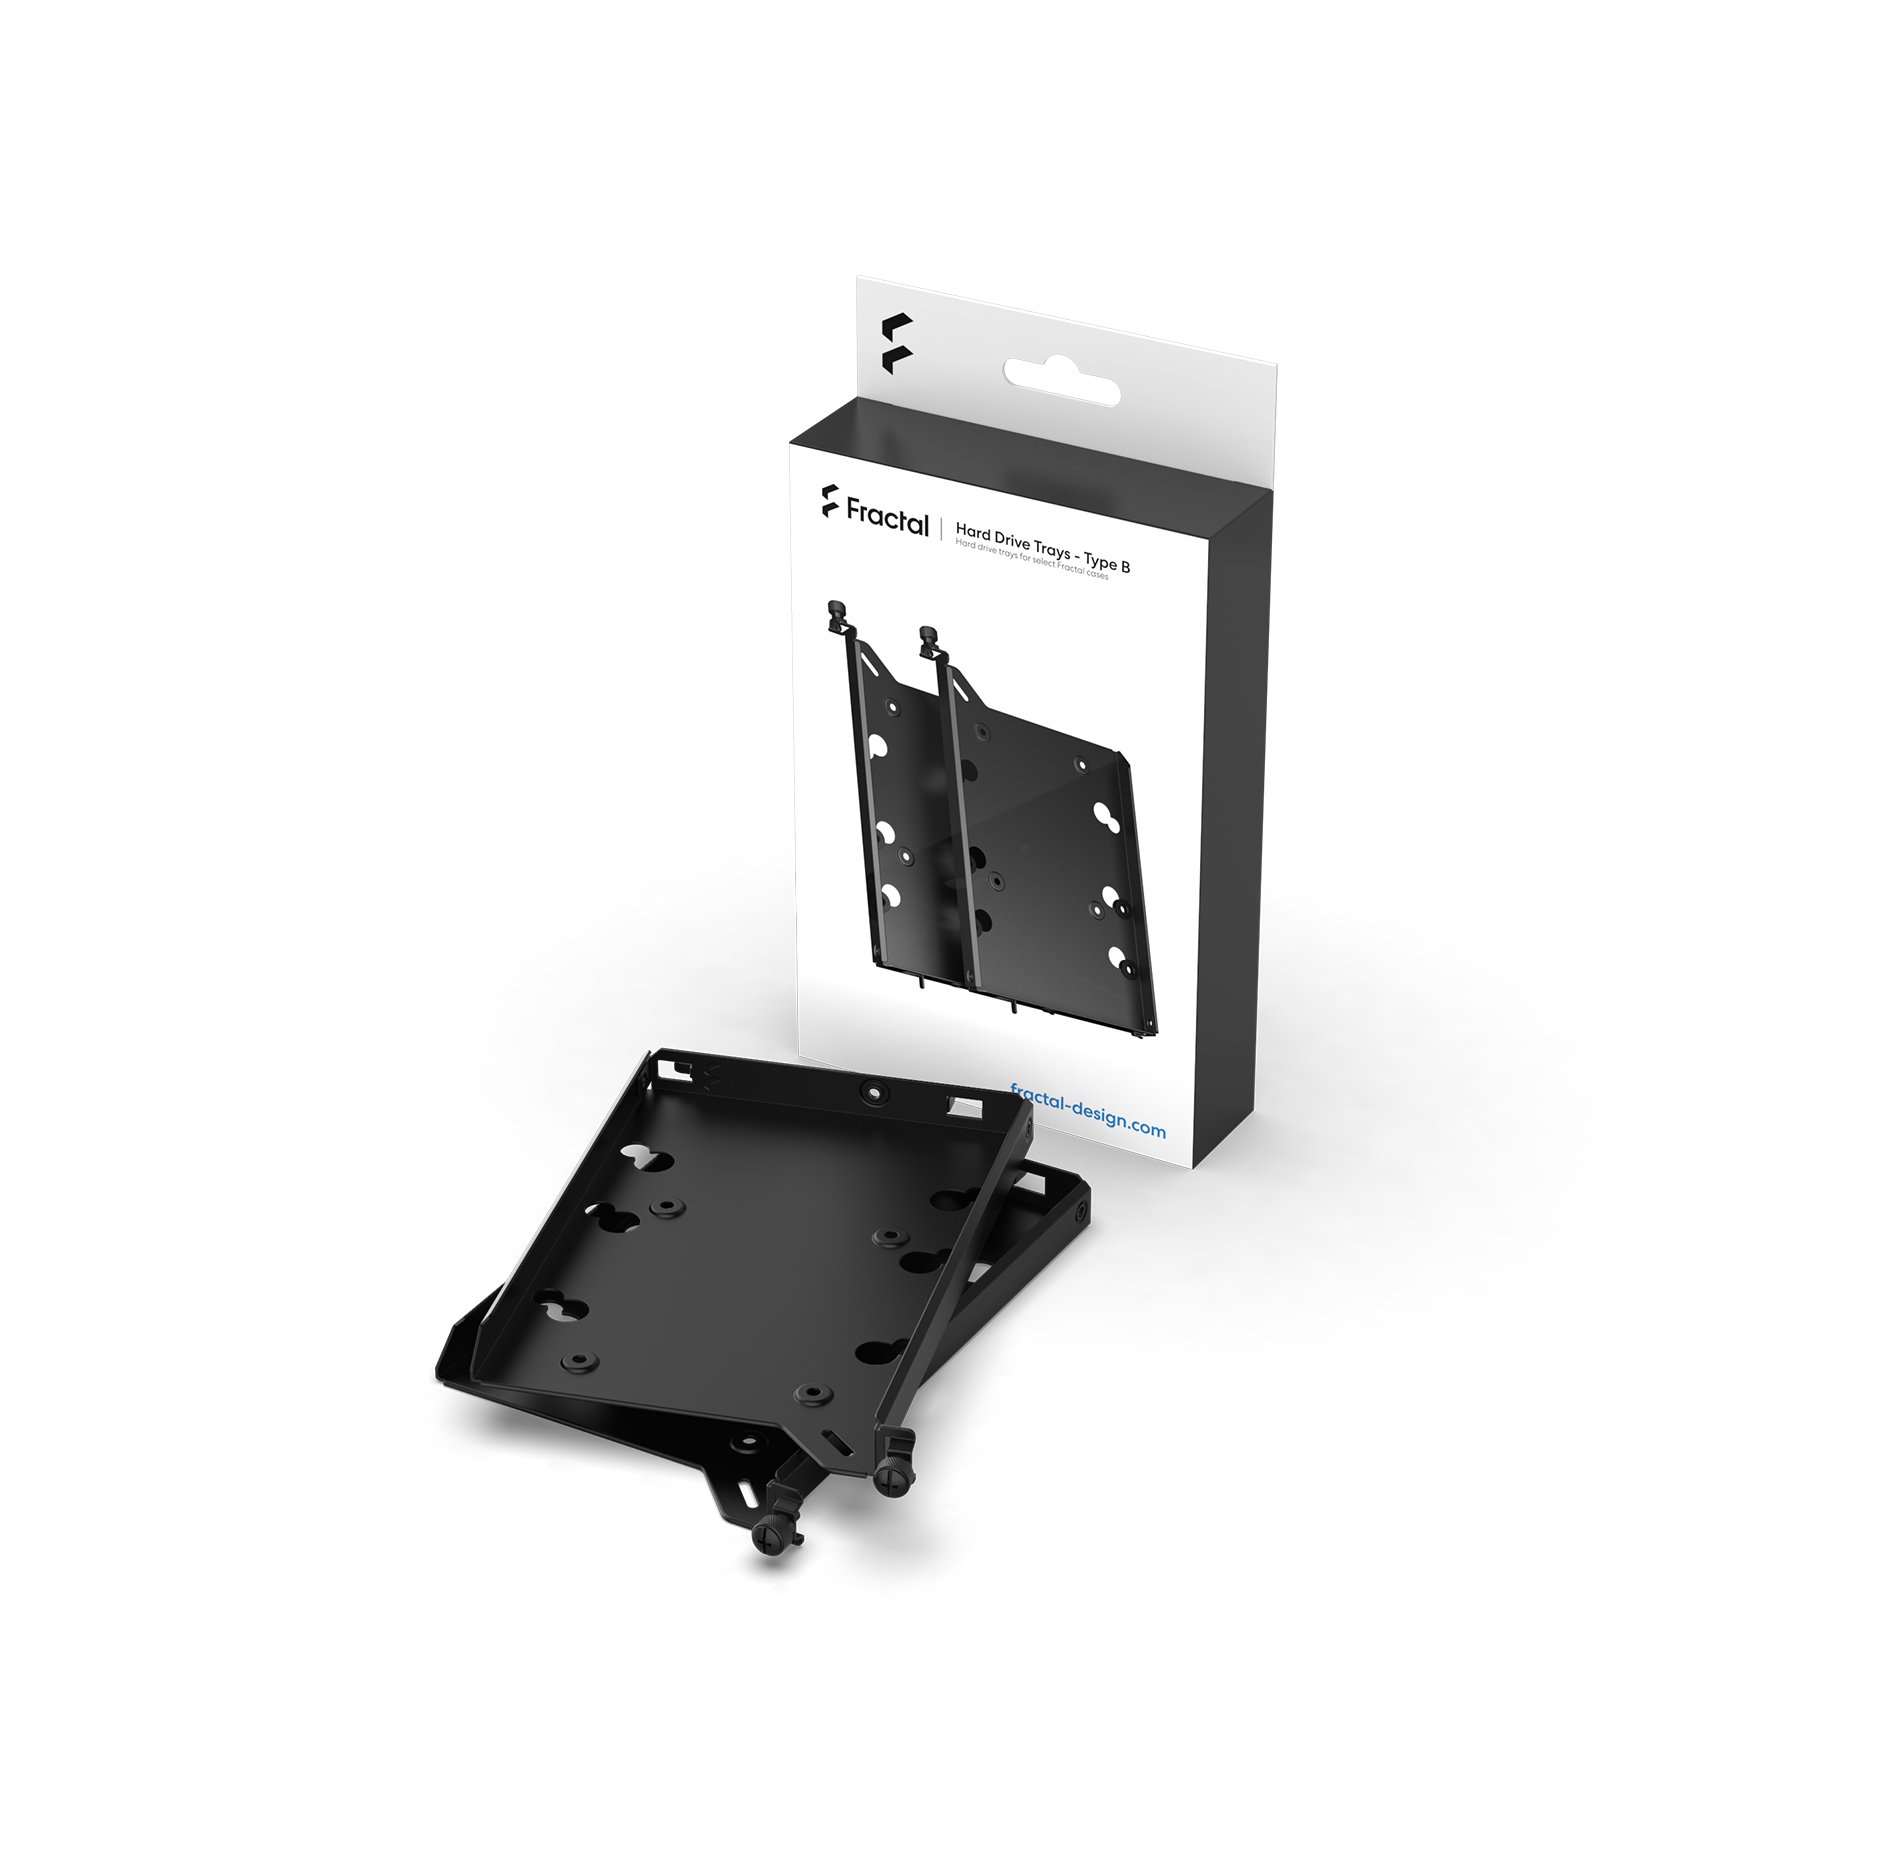 HDD Tray kit - Type-B (2-pack) Design